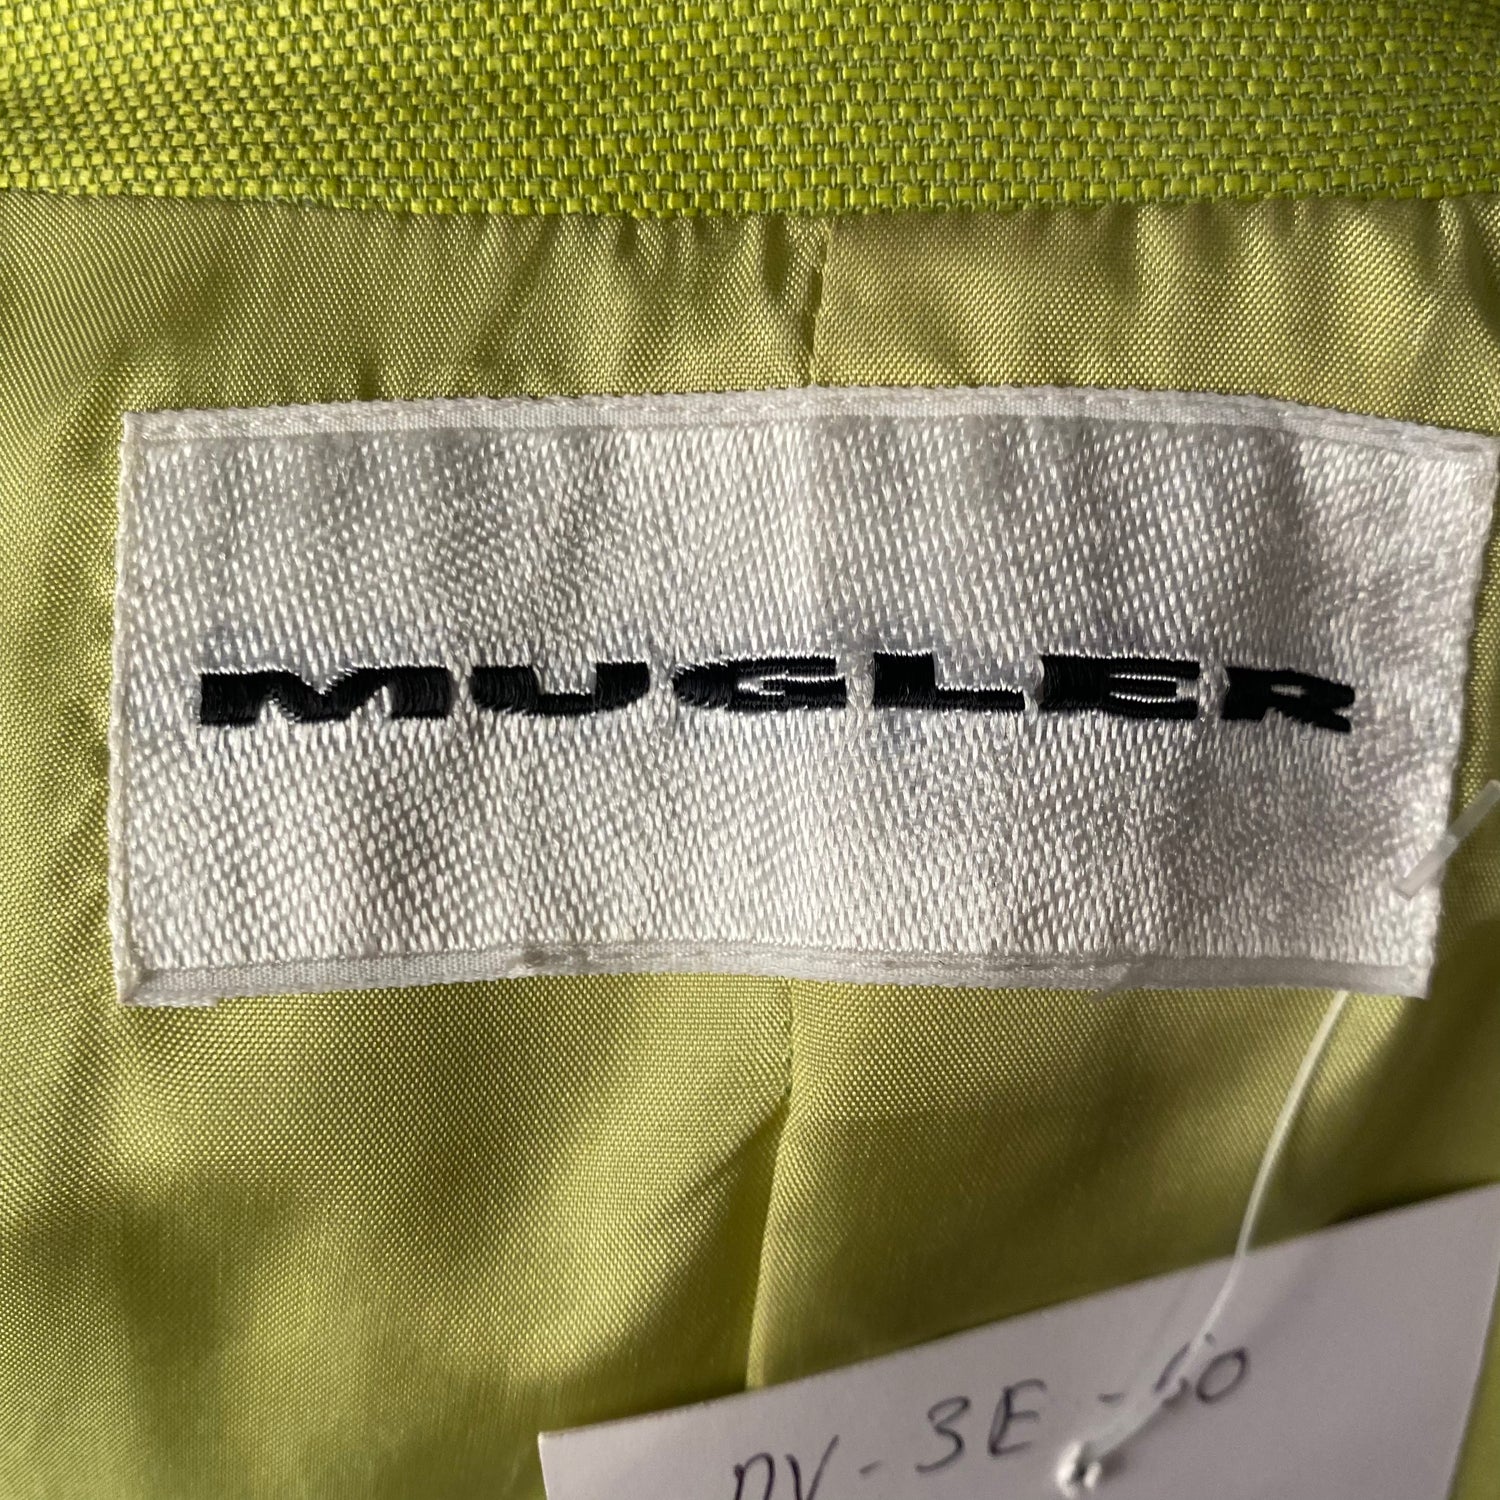 Thierry Mugler vintage lime green cropped jacket  - S - 1990s